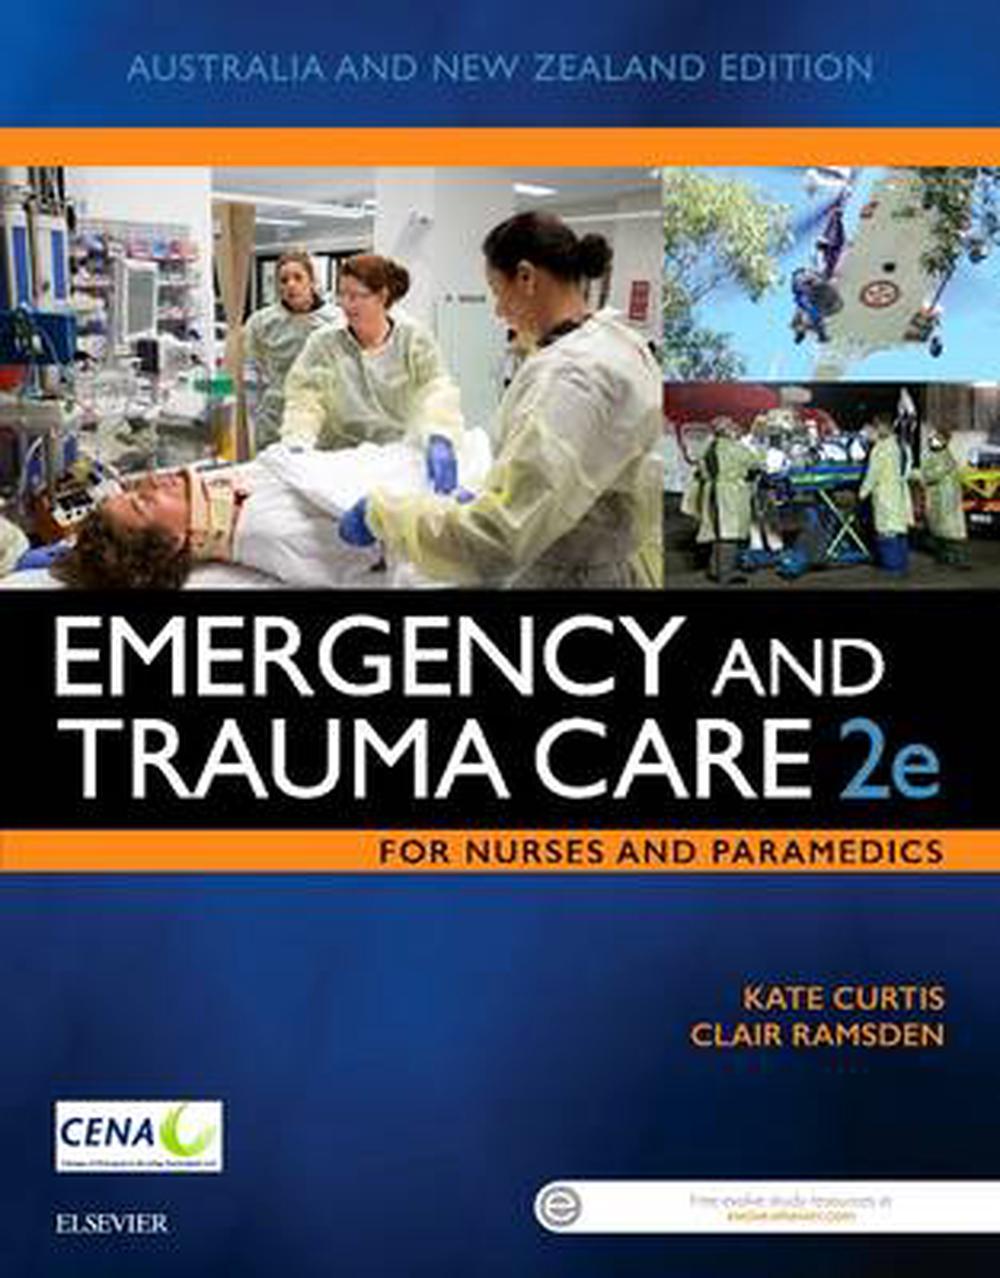 Emergency and Trauma Care for Nurses and Paramedics, 2nd Edition by